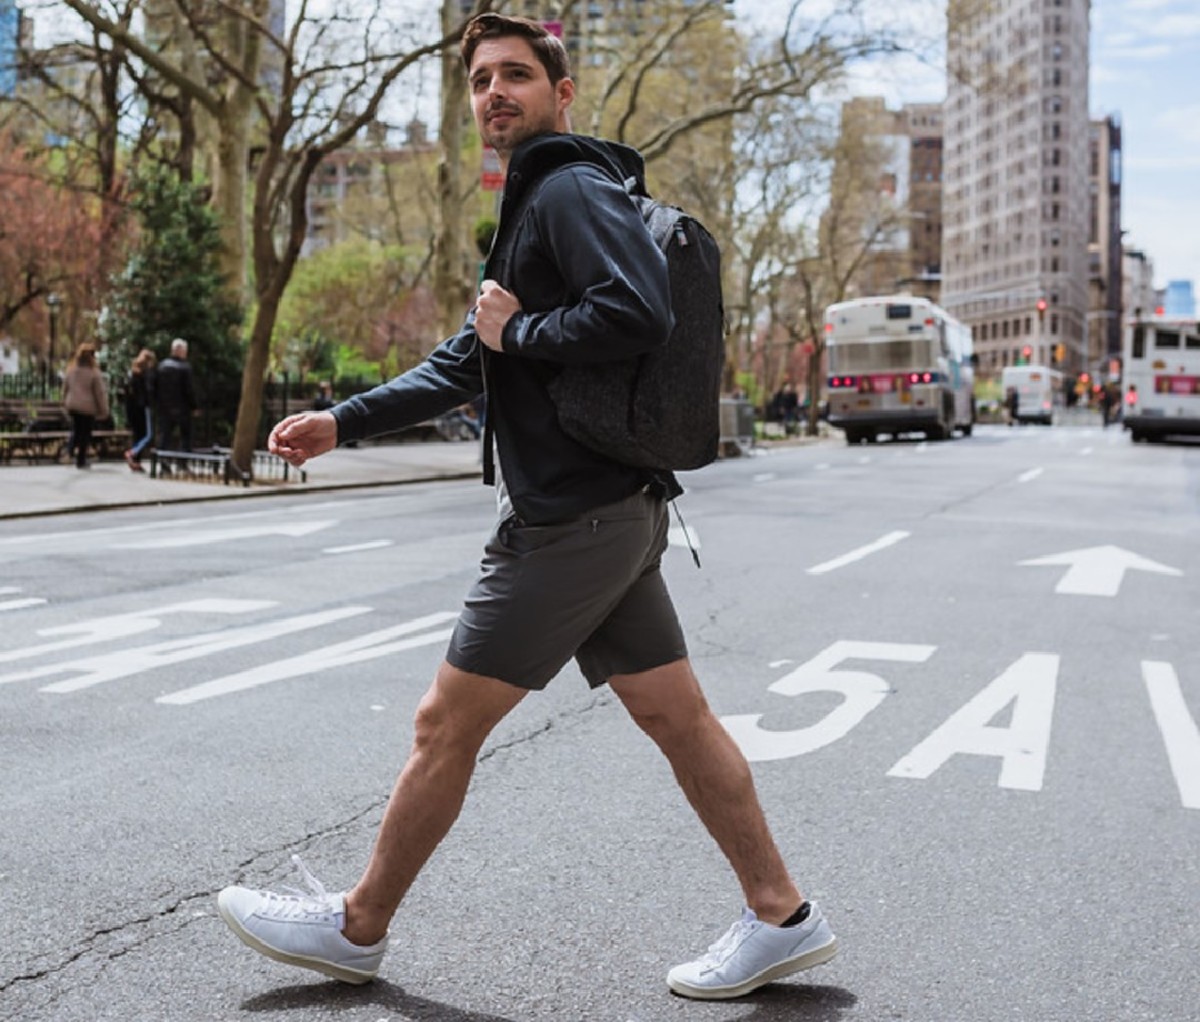 Sports Performance Clothes You Can Wear to Work - Men's Journal